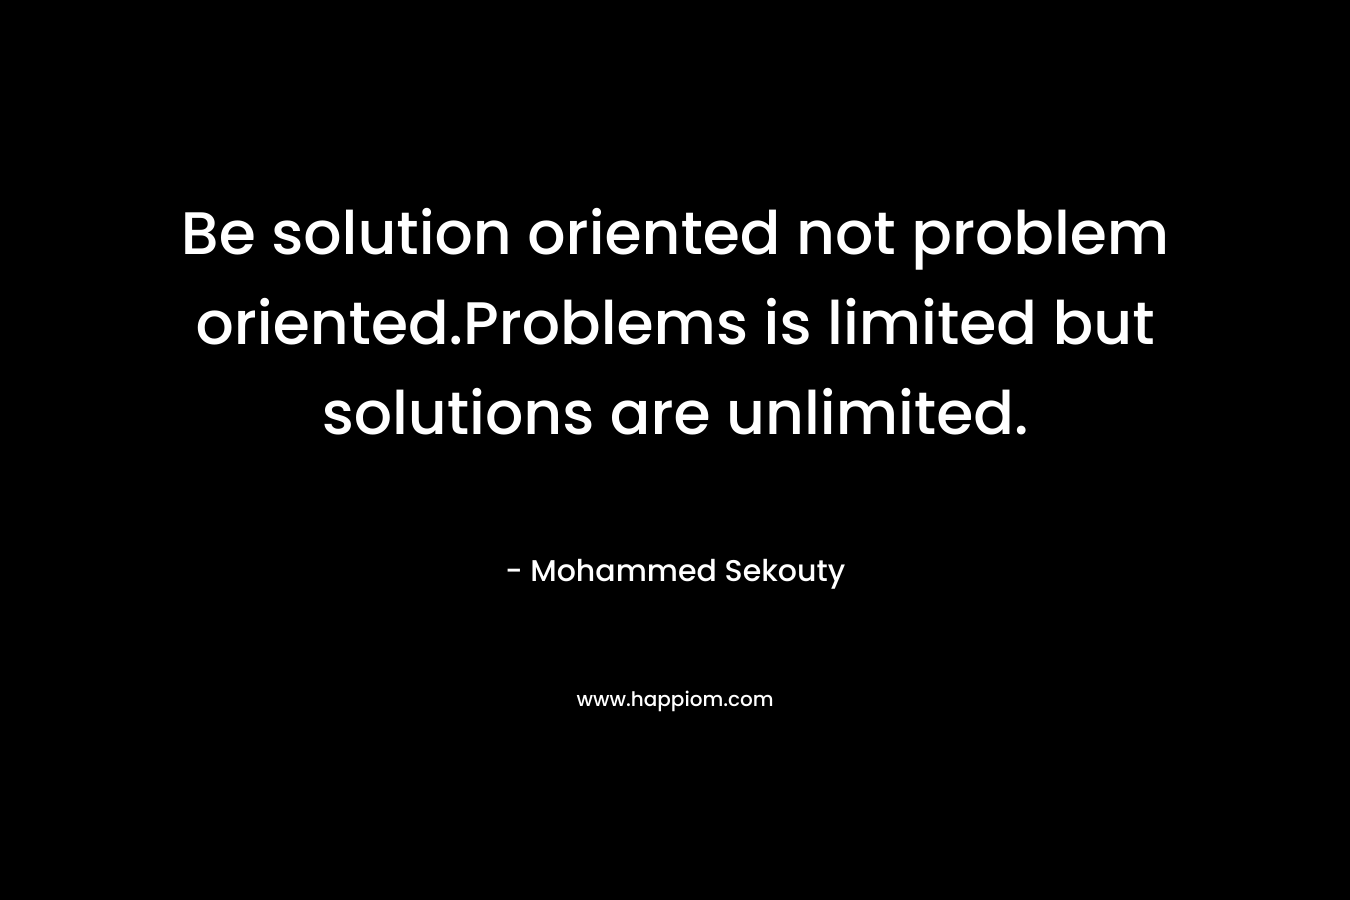 Be solution oriented not problem oriented.Problems is limited but solutions are unlimited.